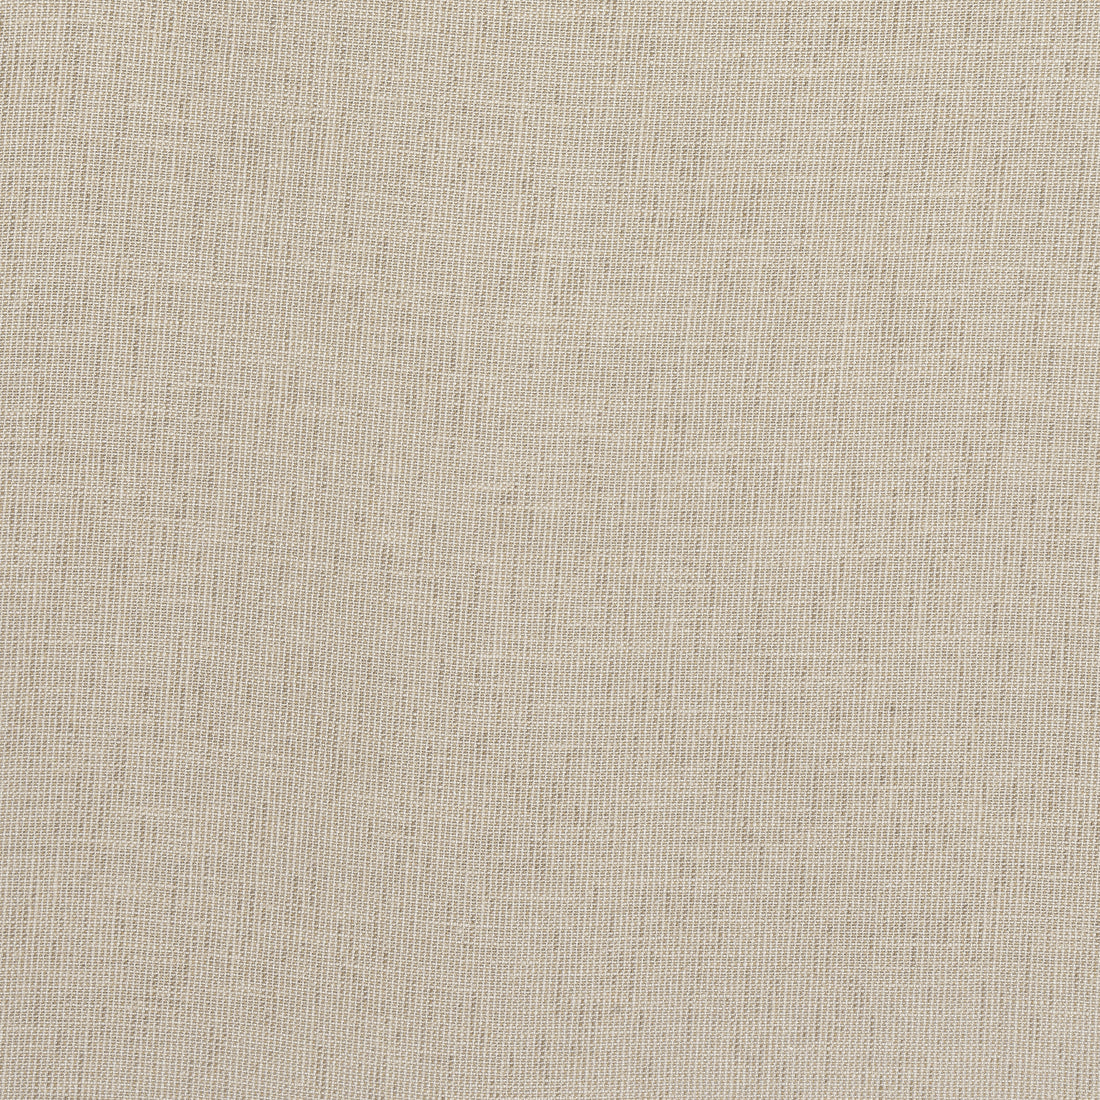 Ottawa fabric in mocha color - pattern number FWW8250 - by Thibaut in the Aura collection